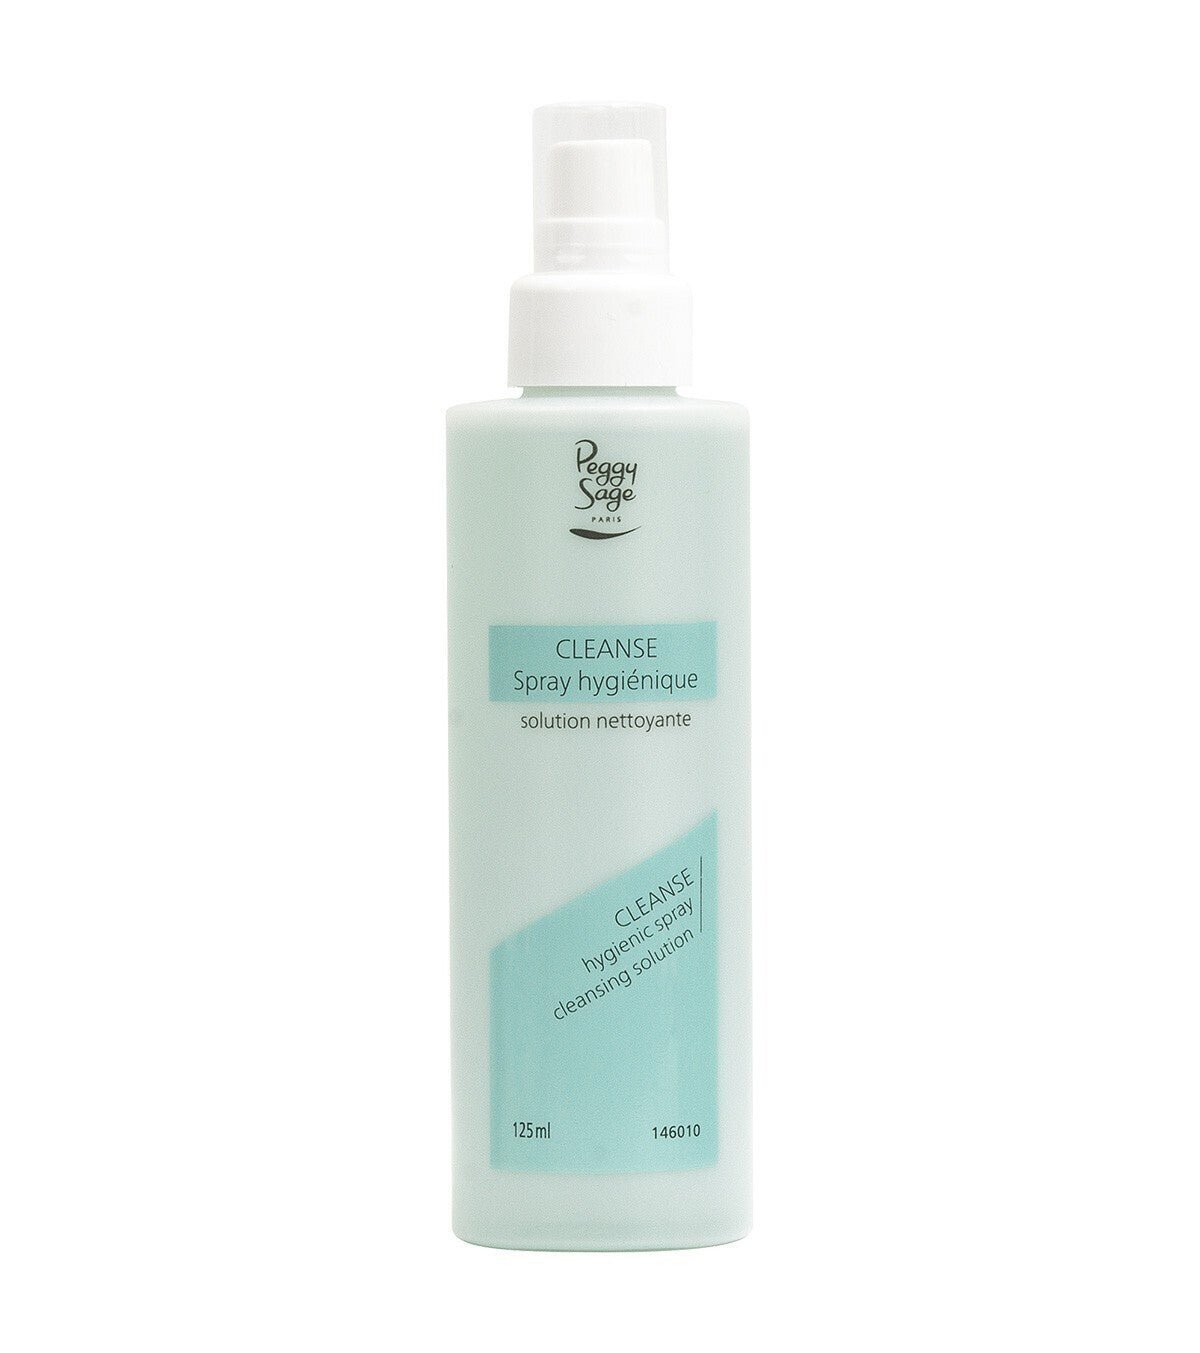 Cleanse spray Peggy Sage – Solution nettoyante 125ml